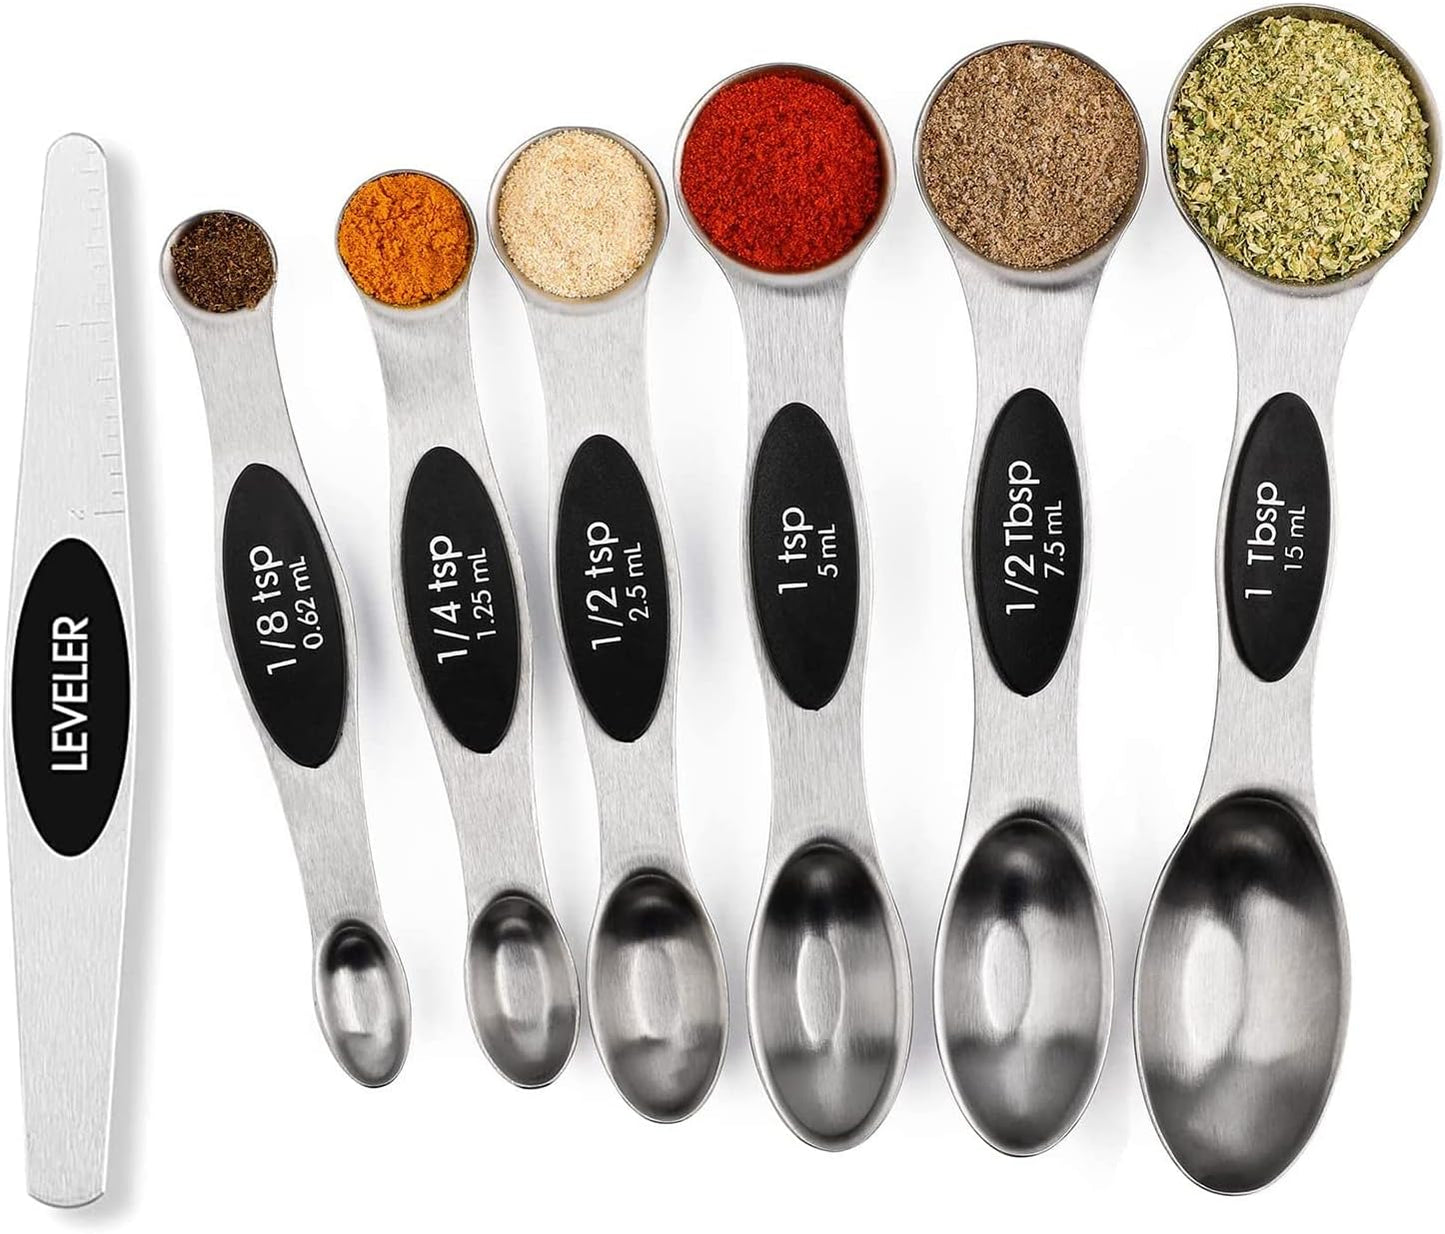 Magnetic Measuring Spoons Set Stainless Steel with Leveler, Stackable Metal Tablespoon Measure Spoon for Baking, Cups and Spoon Set Kitchen Gadgets Apartment Essentials Fits in Spice Jars